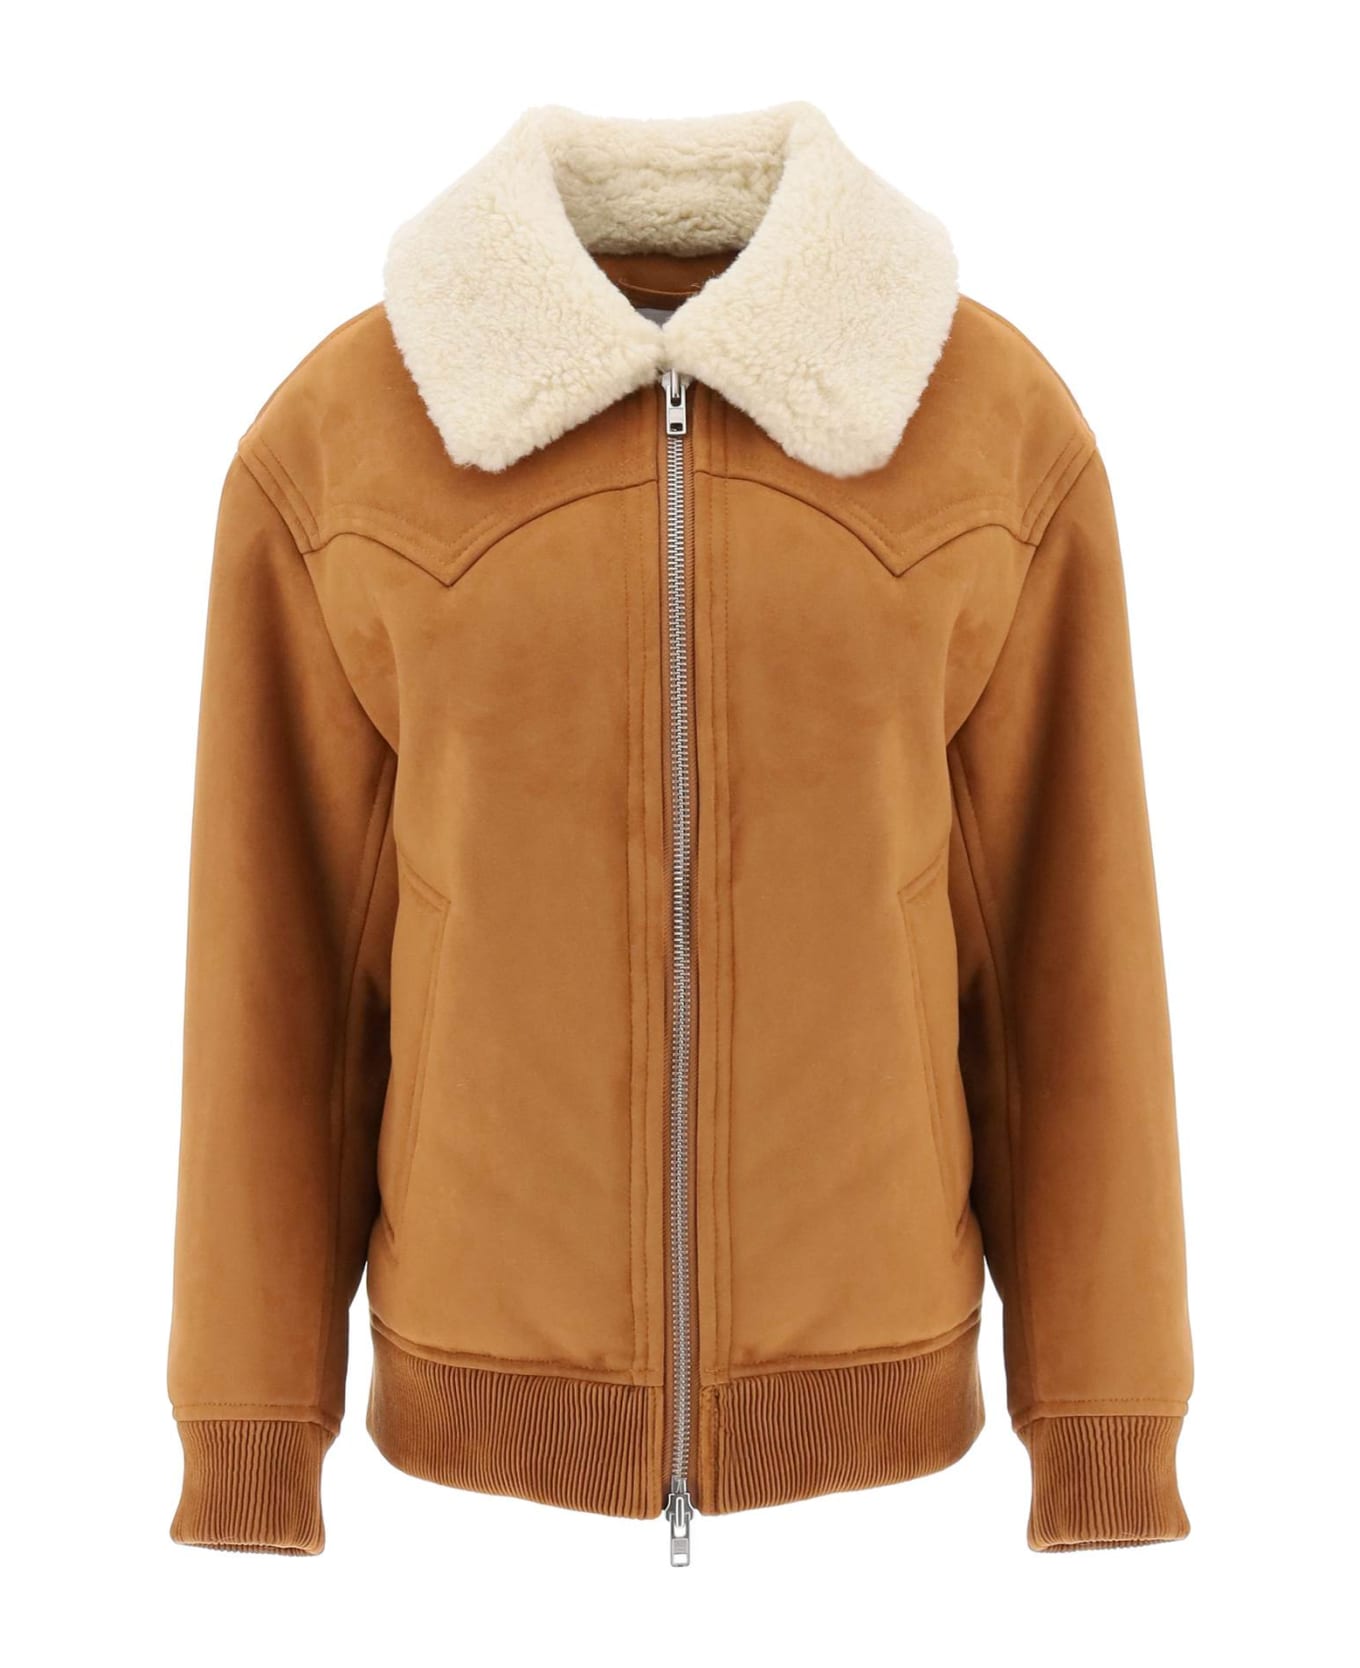 STAND STUDIO Lillee Eco-shearling Bomber Jacket - TAN NATURAL WHITE (Brown)